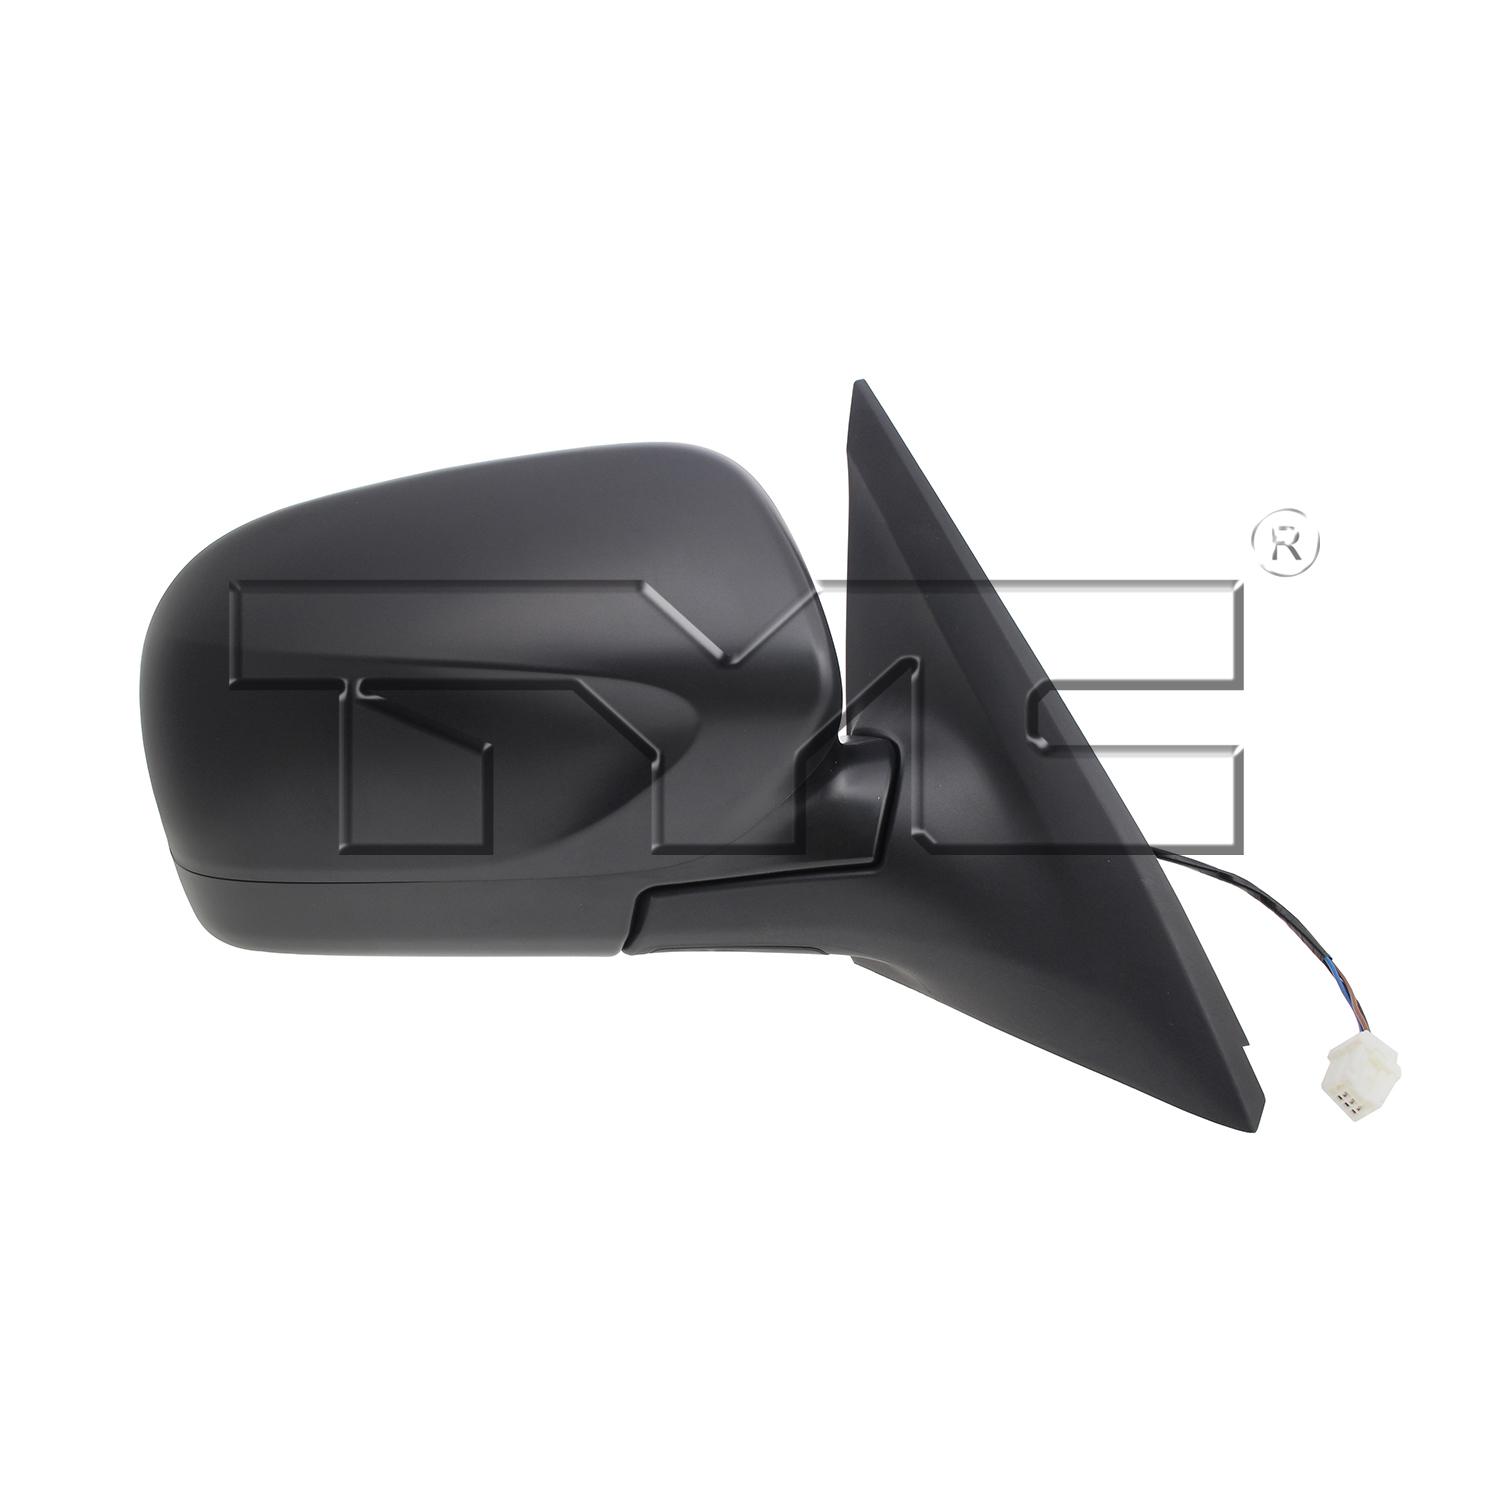 Aftermarket MIRRORS for SUBARU - FORESTER, FORESTER,09-10,RT Mirror outside rear view